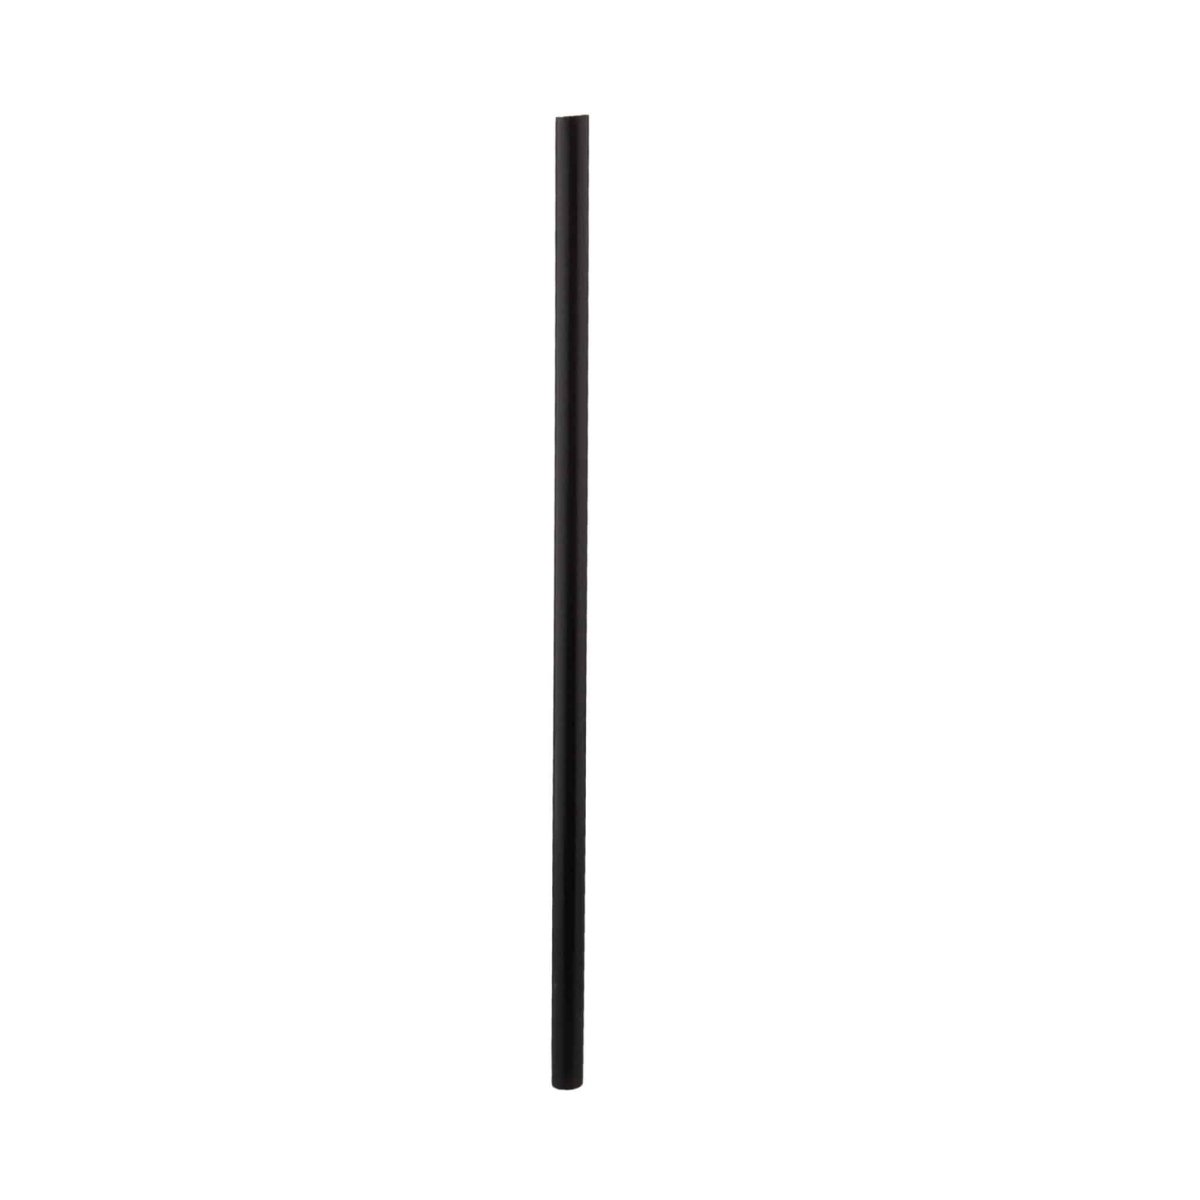 8mm Black Straight Straw Wrapped 250 Pieces x 40 Packet - hotpackwebstore.com - Plastic Straws